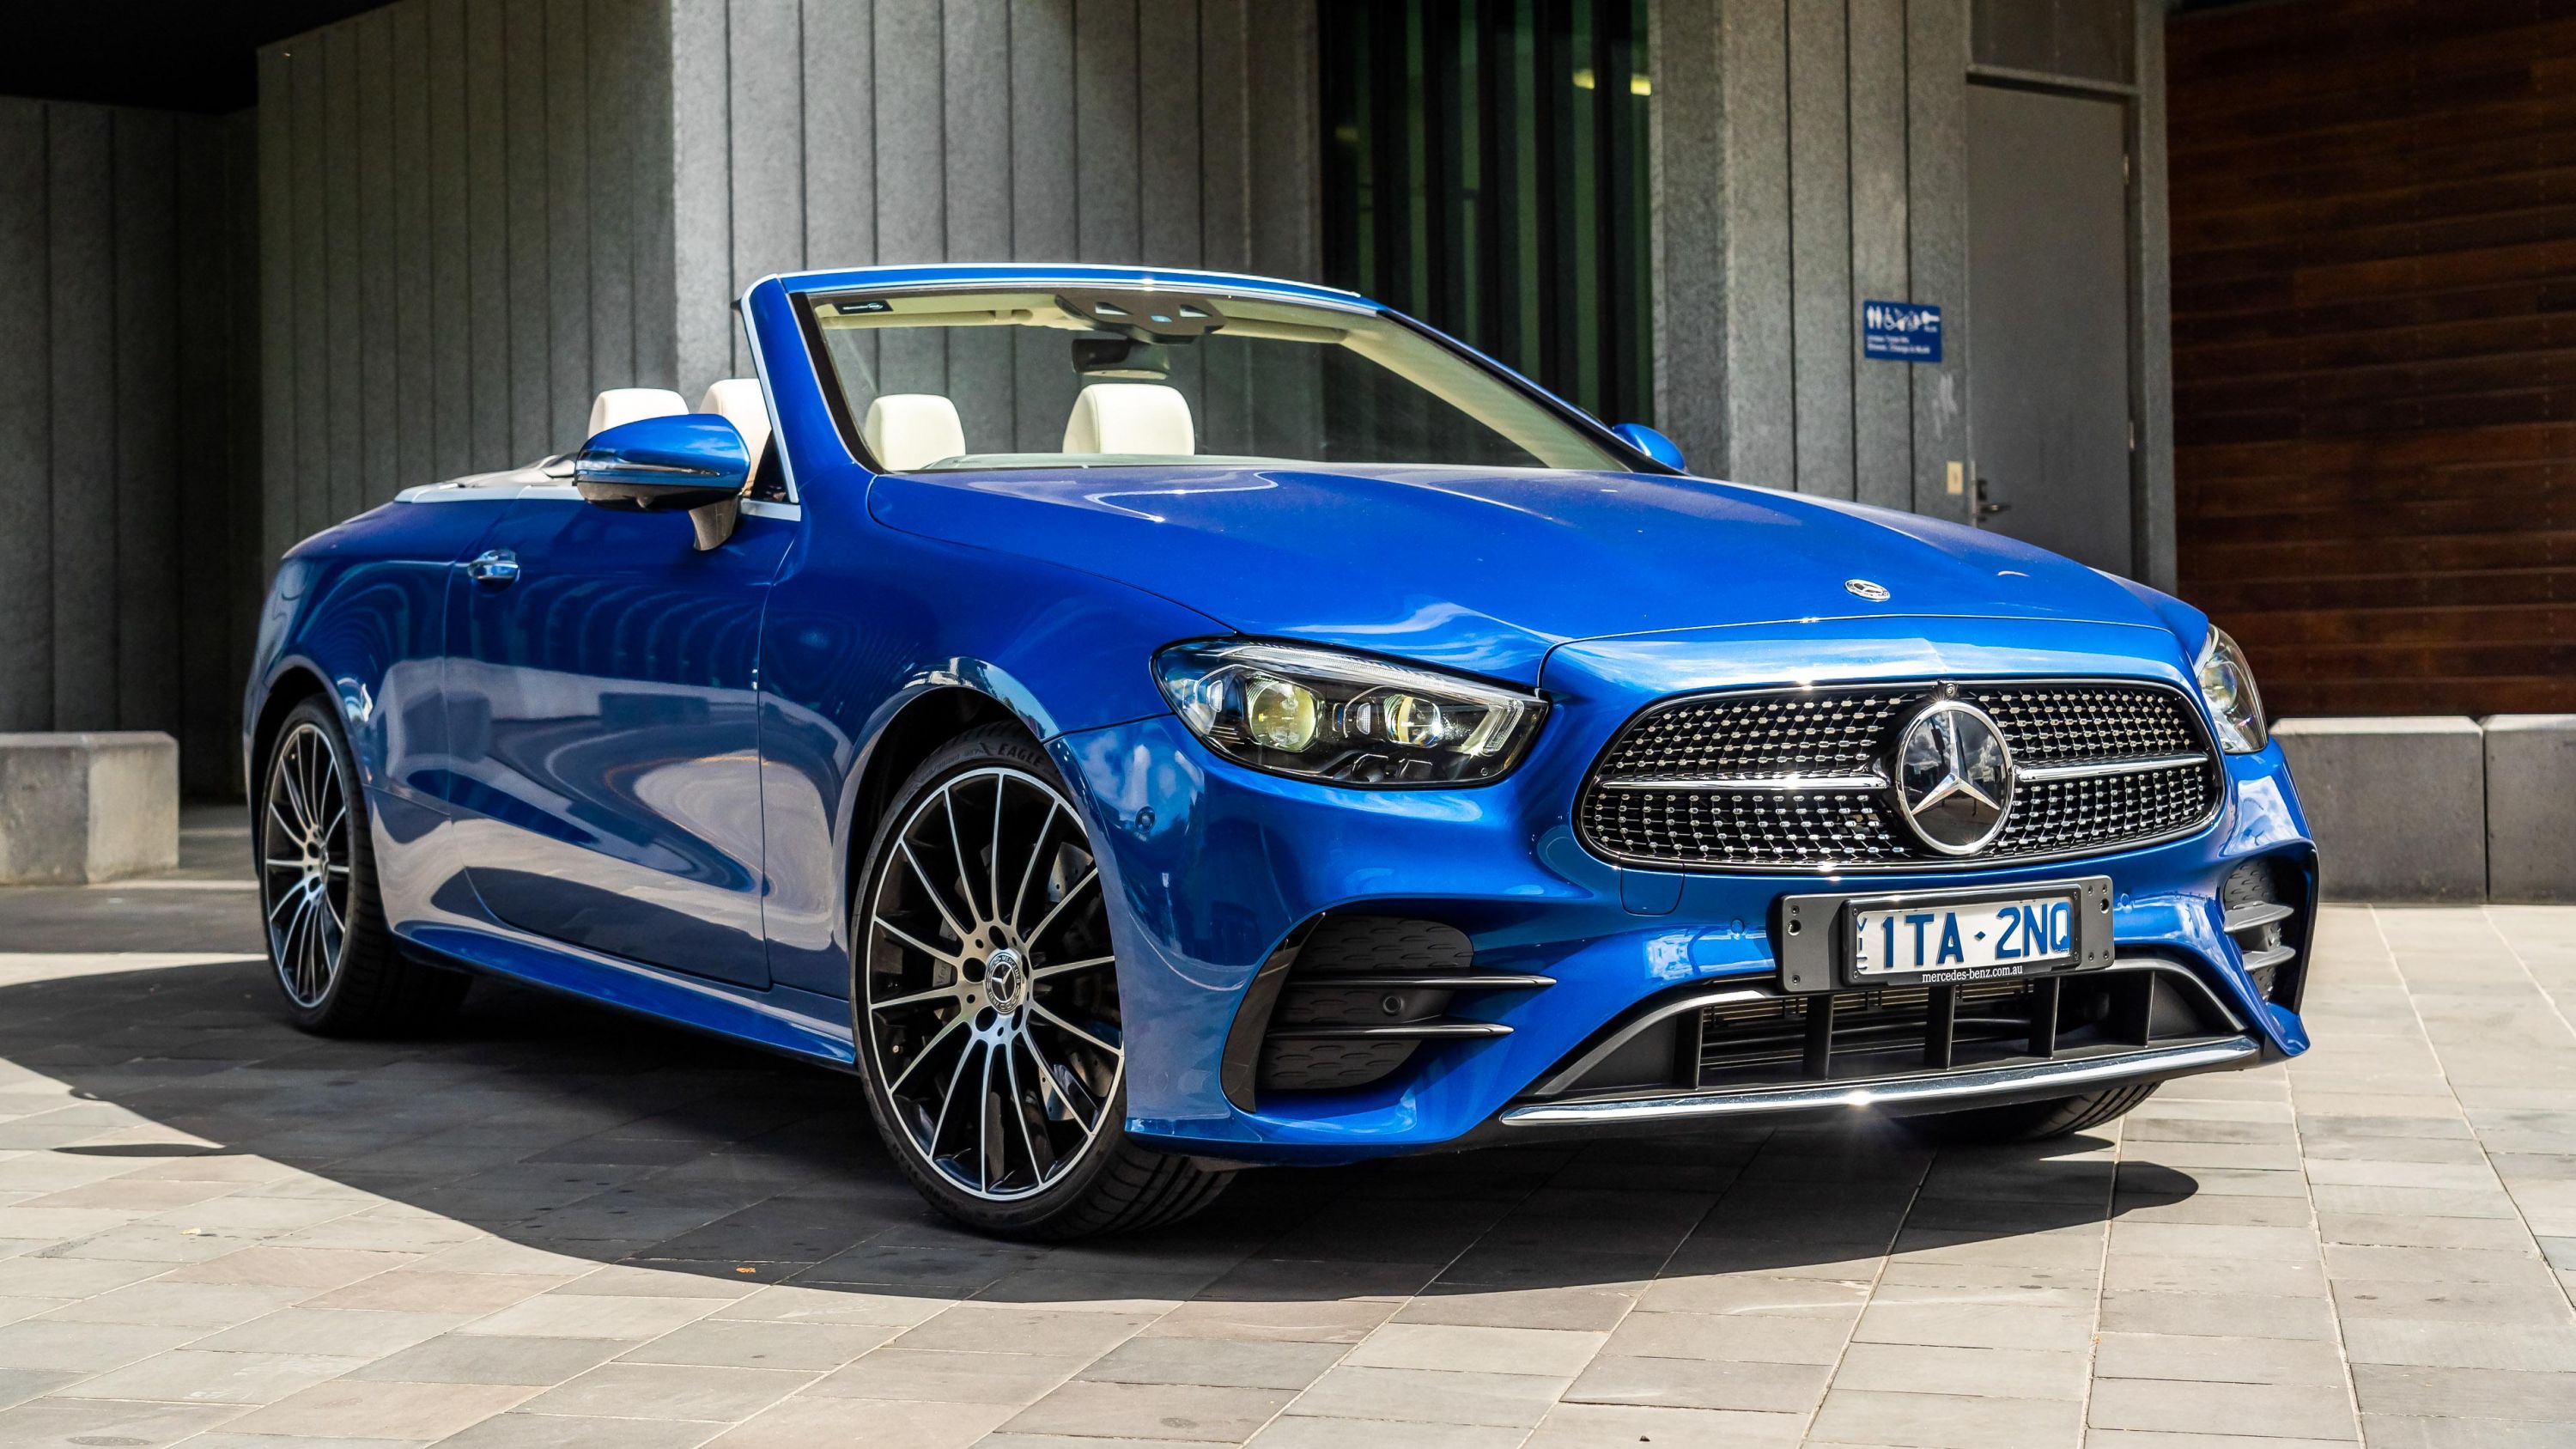 2021 Mercedes-Benz E-Class Coupe, Cabriolet: Got Very Specific